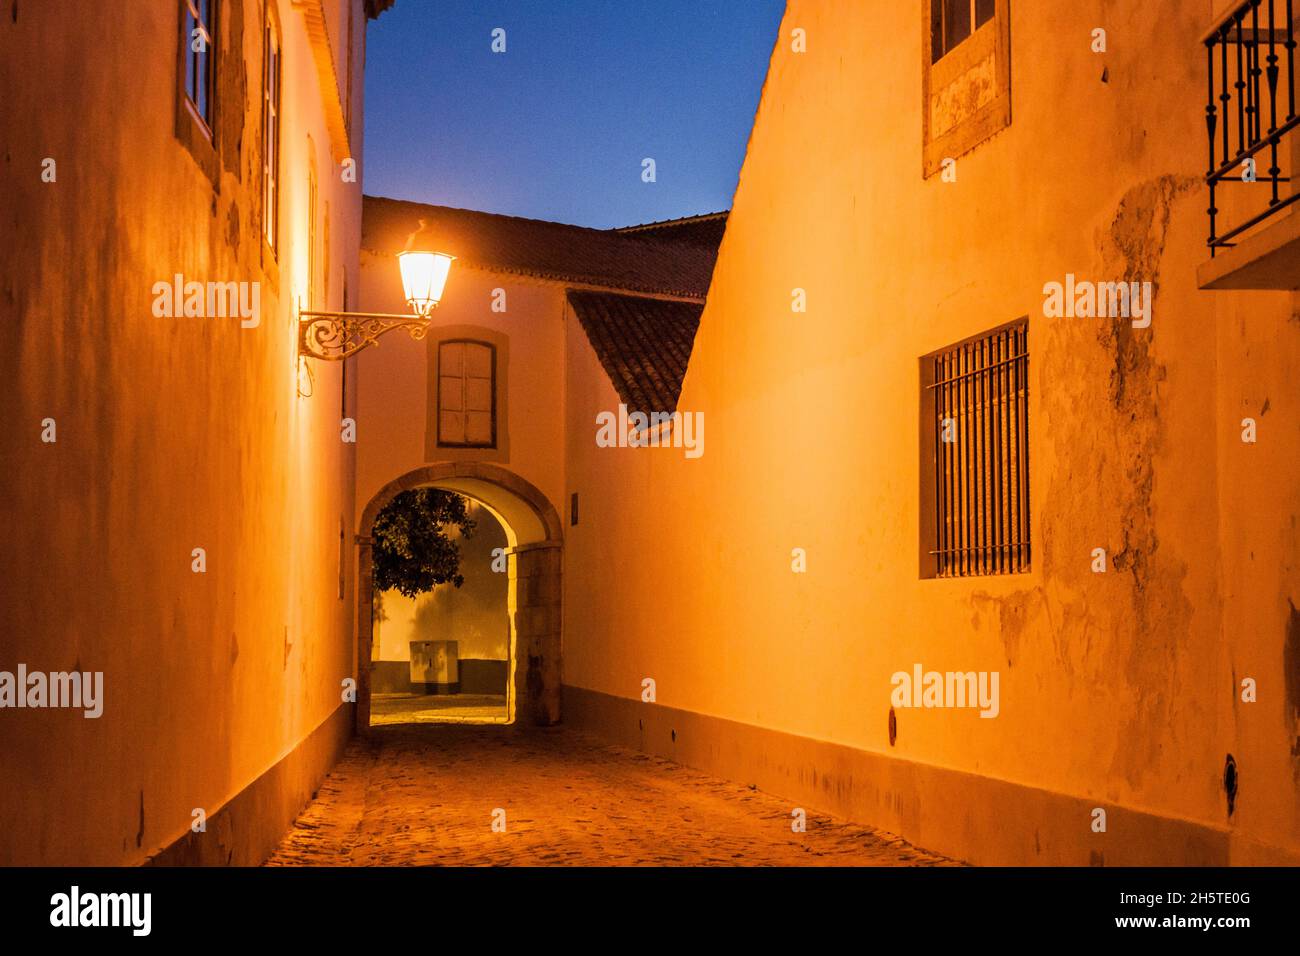 Evening view of a street in the Old Town Cidade Velha of Faro, Portugal. Stock Photo